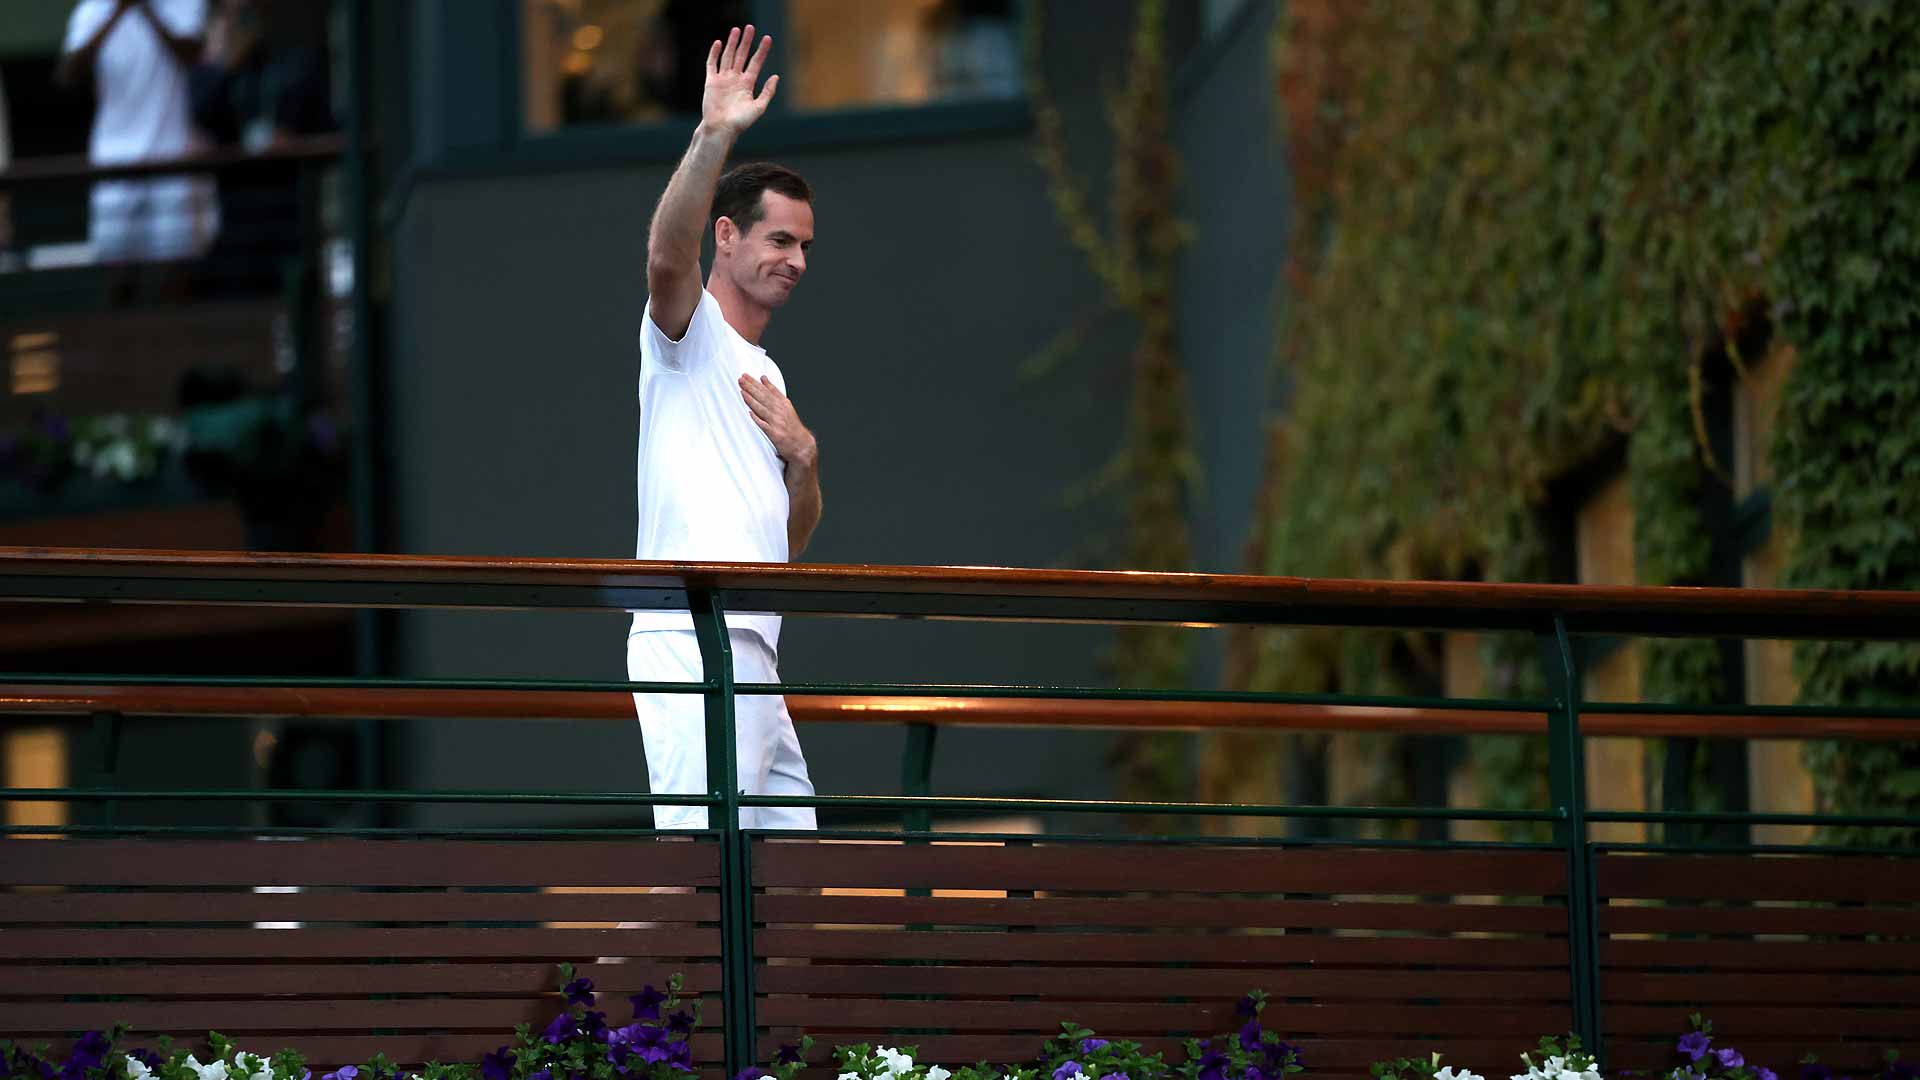 Andy Murray waves to fans after his men's doubles match Thursday evening at Wimbledon.